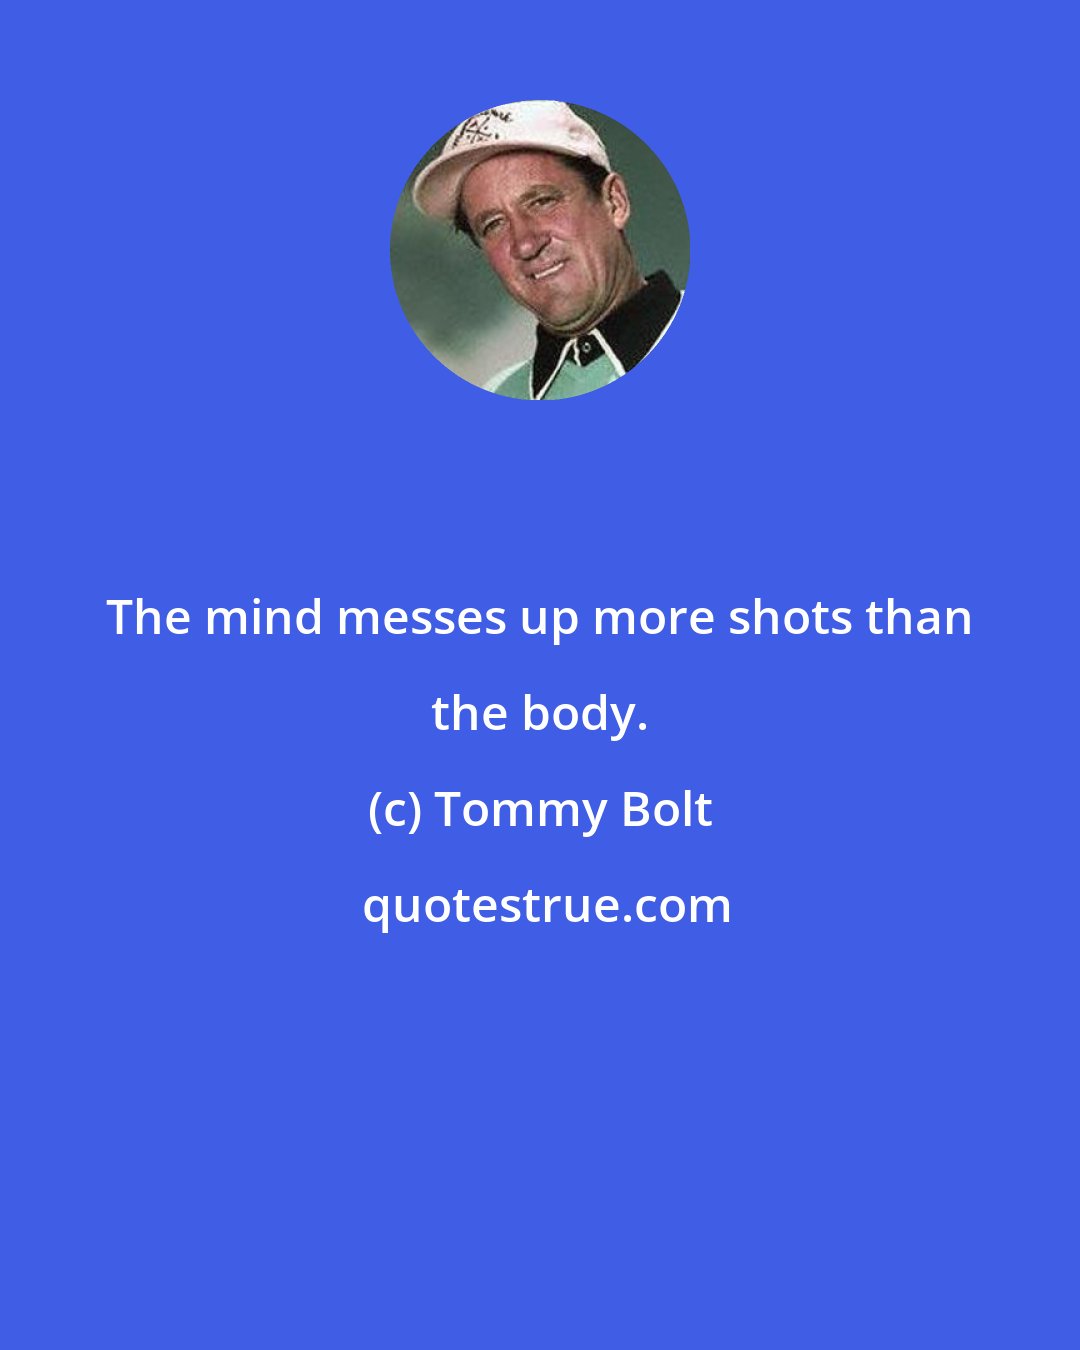 Tommy Bolt: The mind messes up more shots than the body.